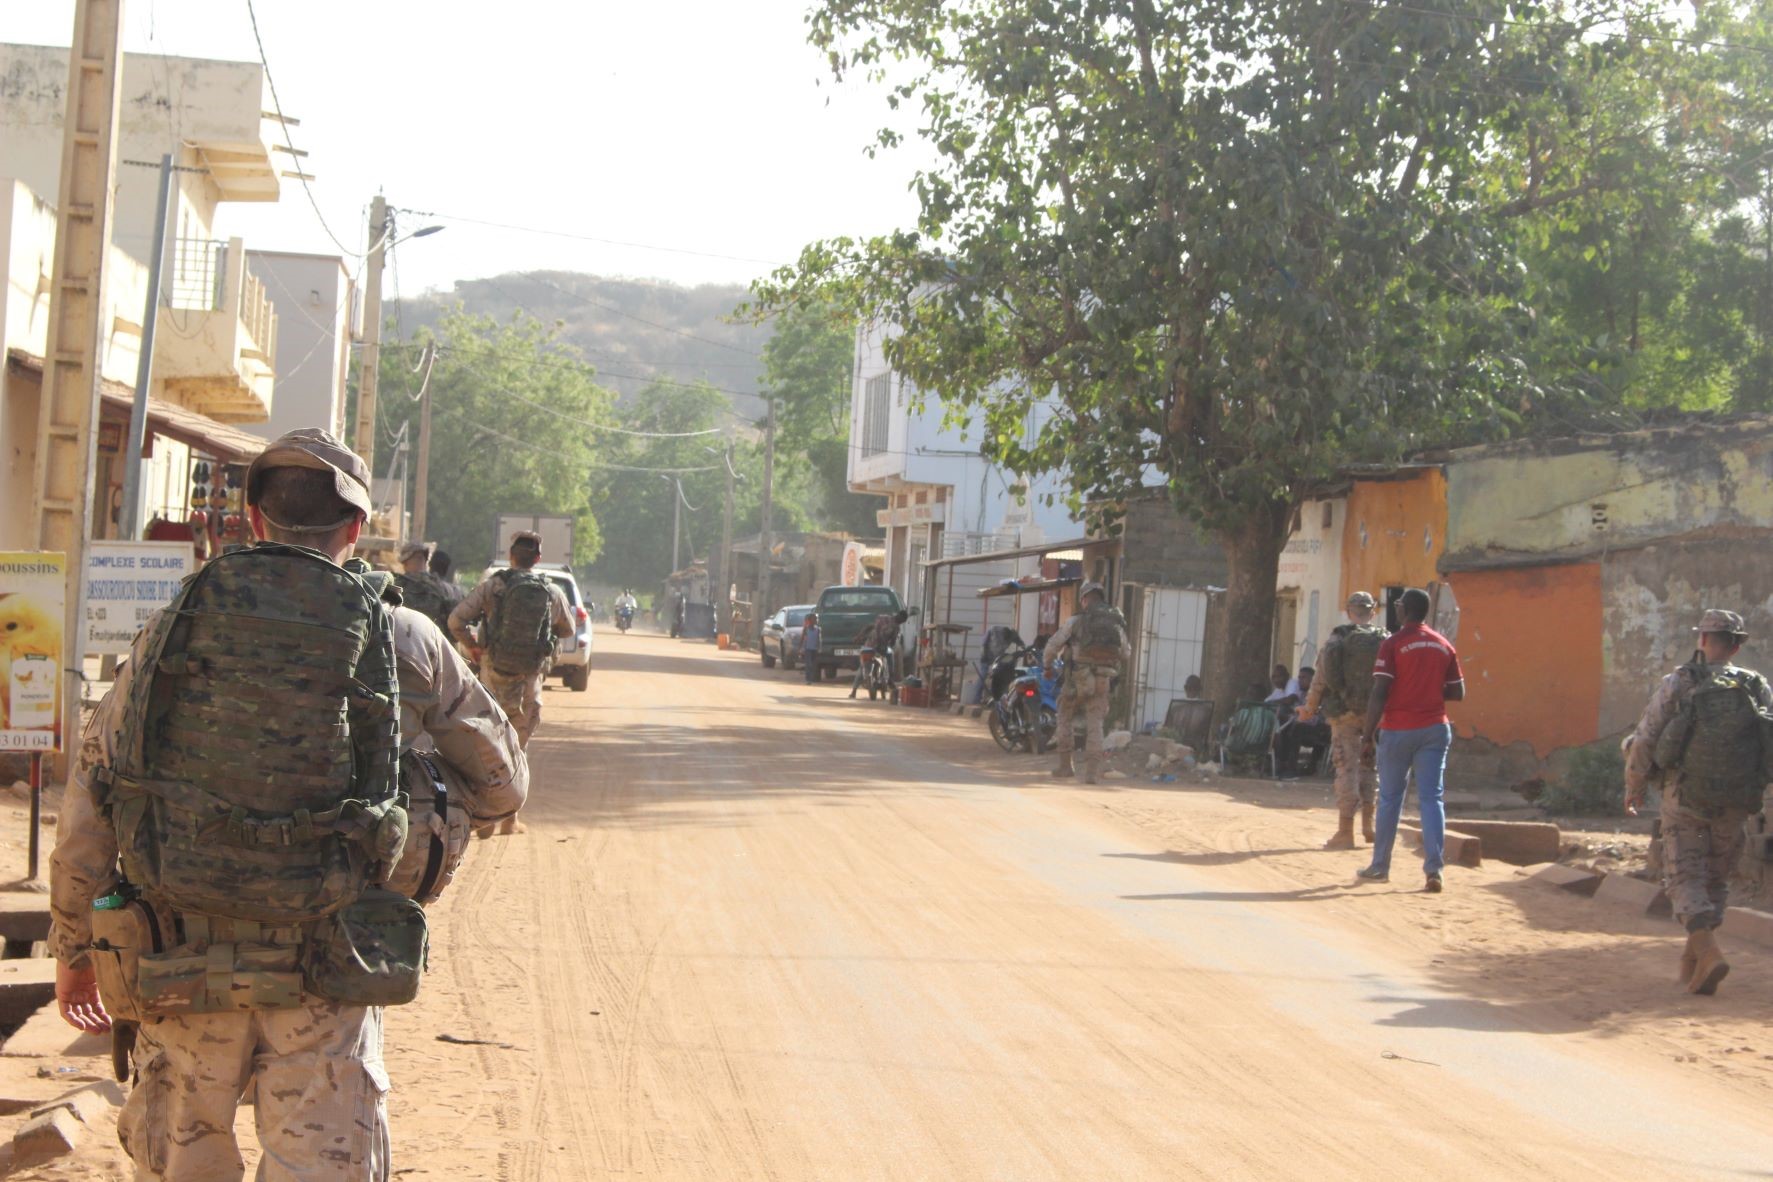 Patrolling in one of the Malian villages